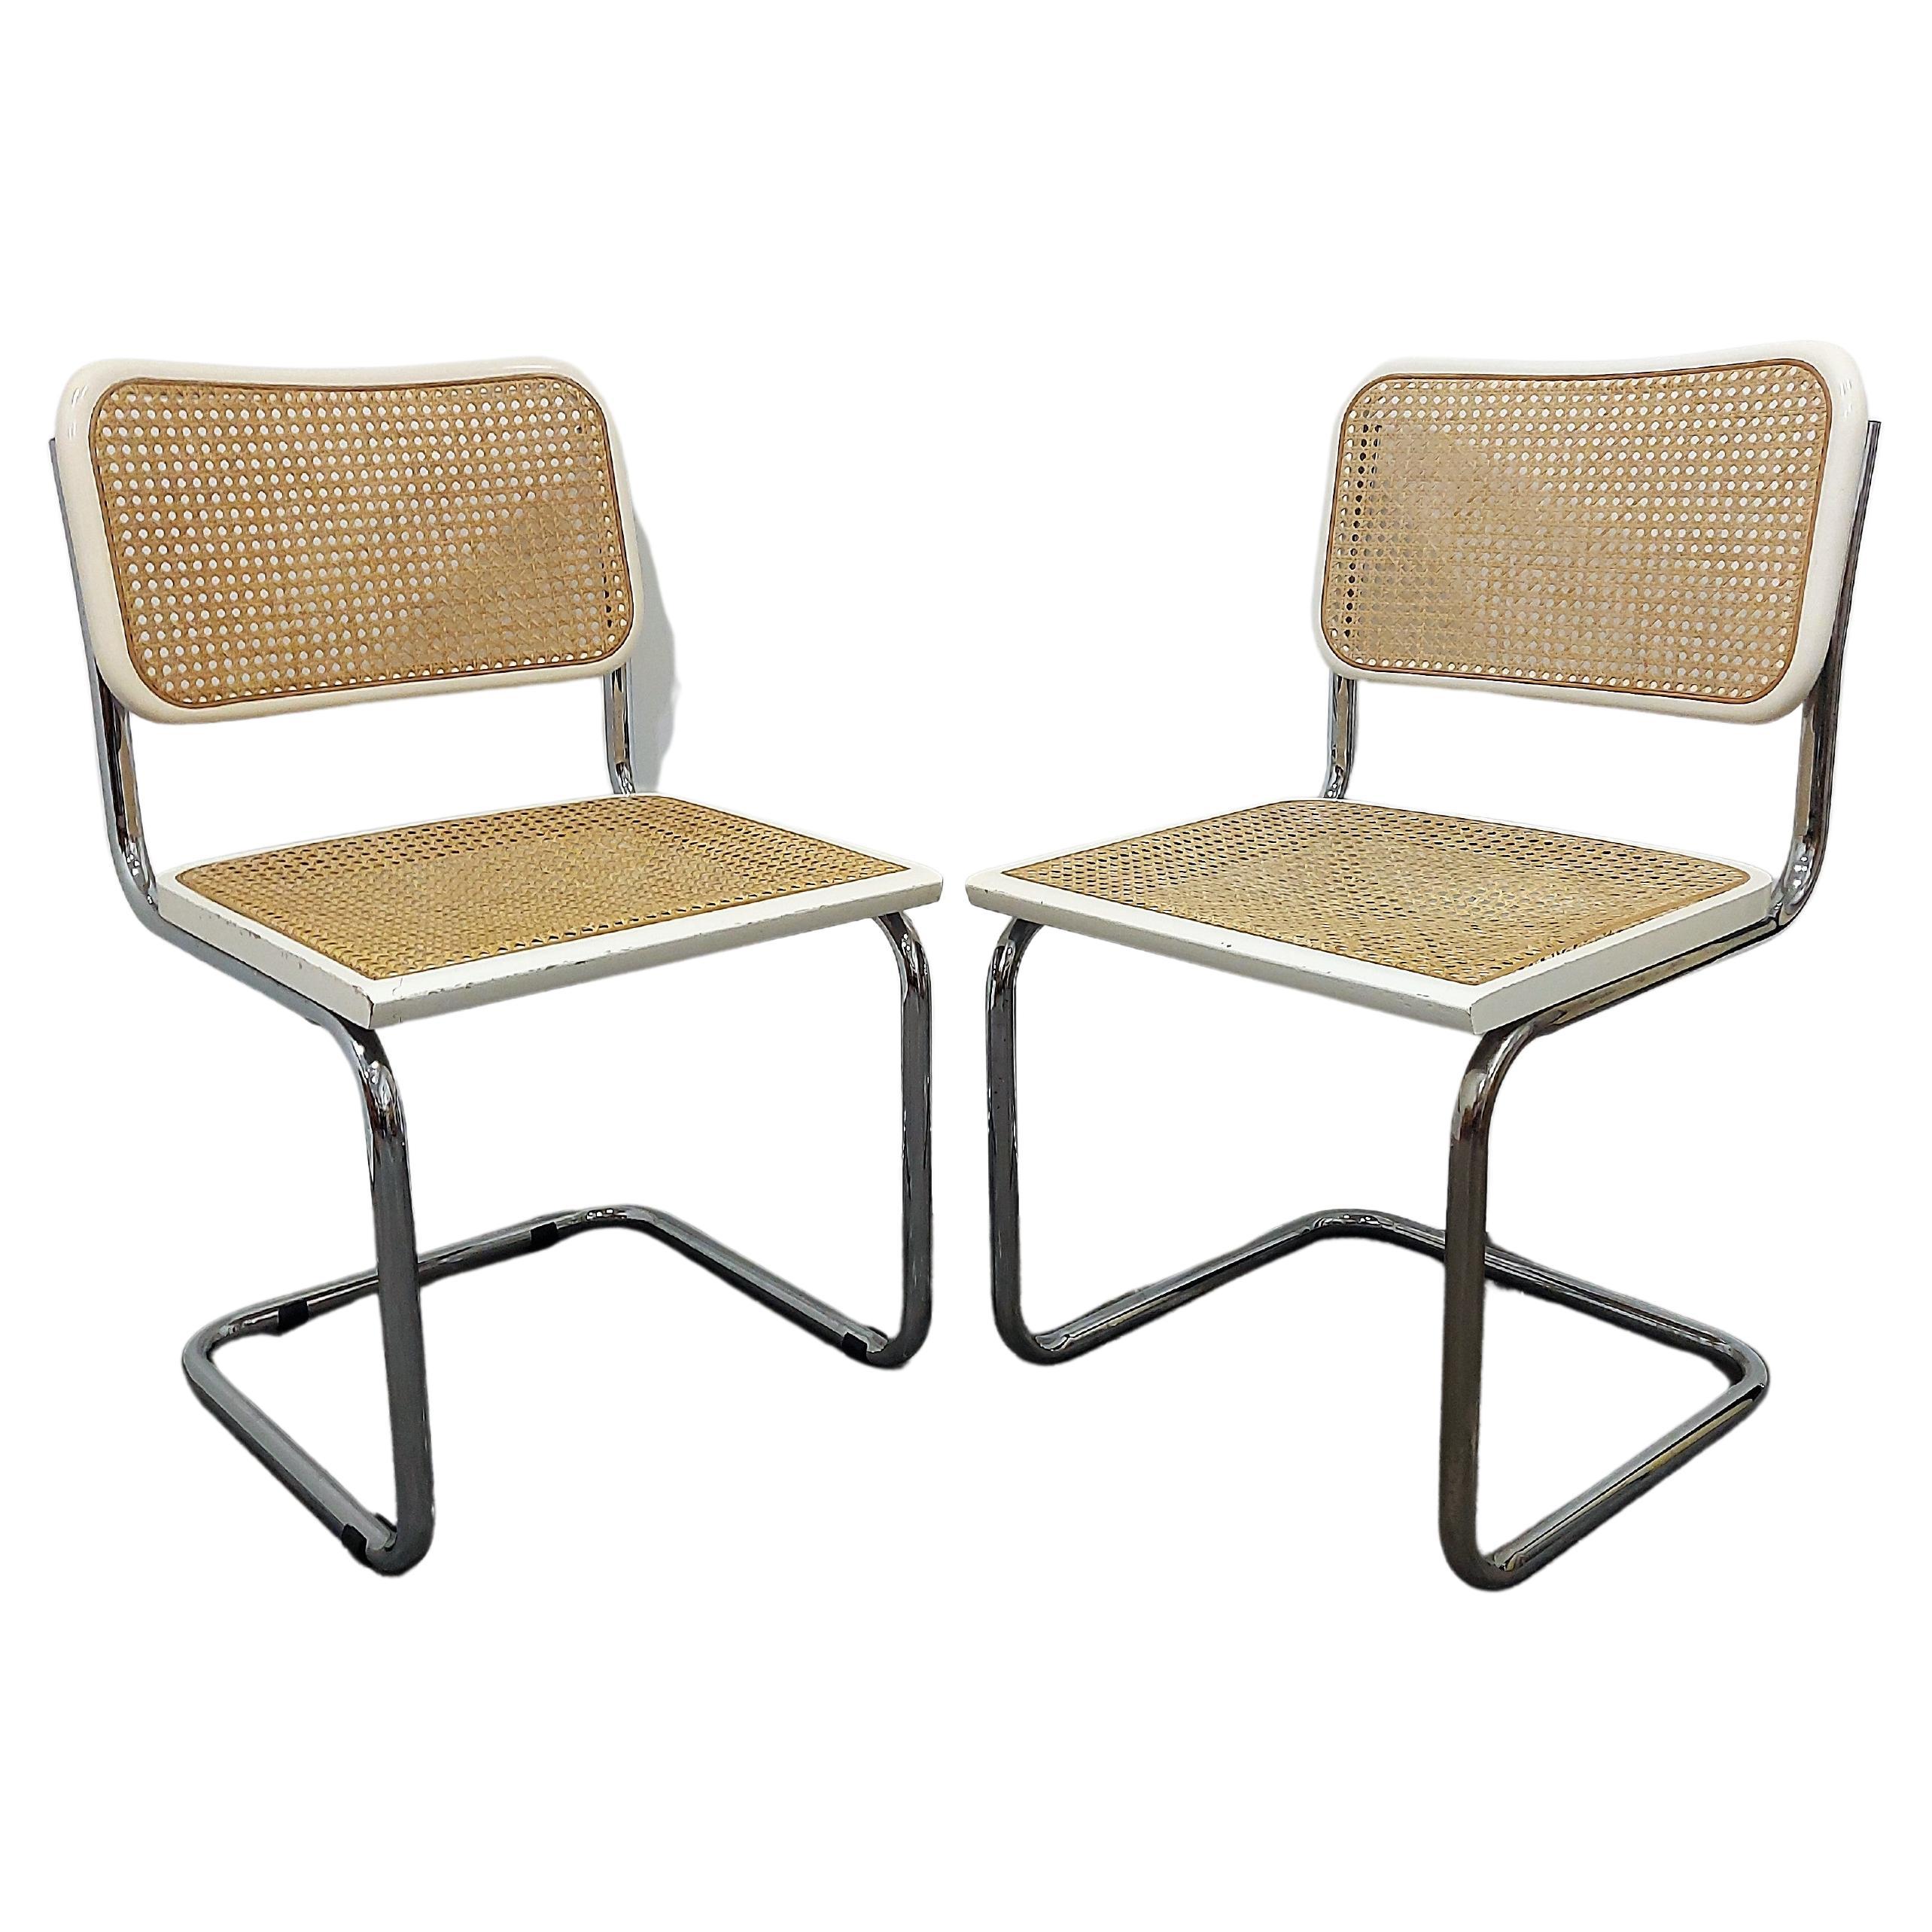 Cesca chair, 1970s

Designer Marcel Breuer

Design Period: 1920 to 1949

Production Period: 1970 to 1979

Style: midcentury

Producer: Label - STOL Kamnik.